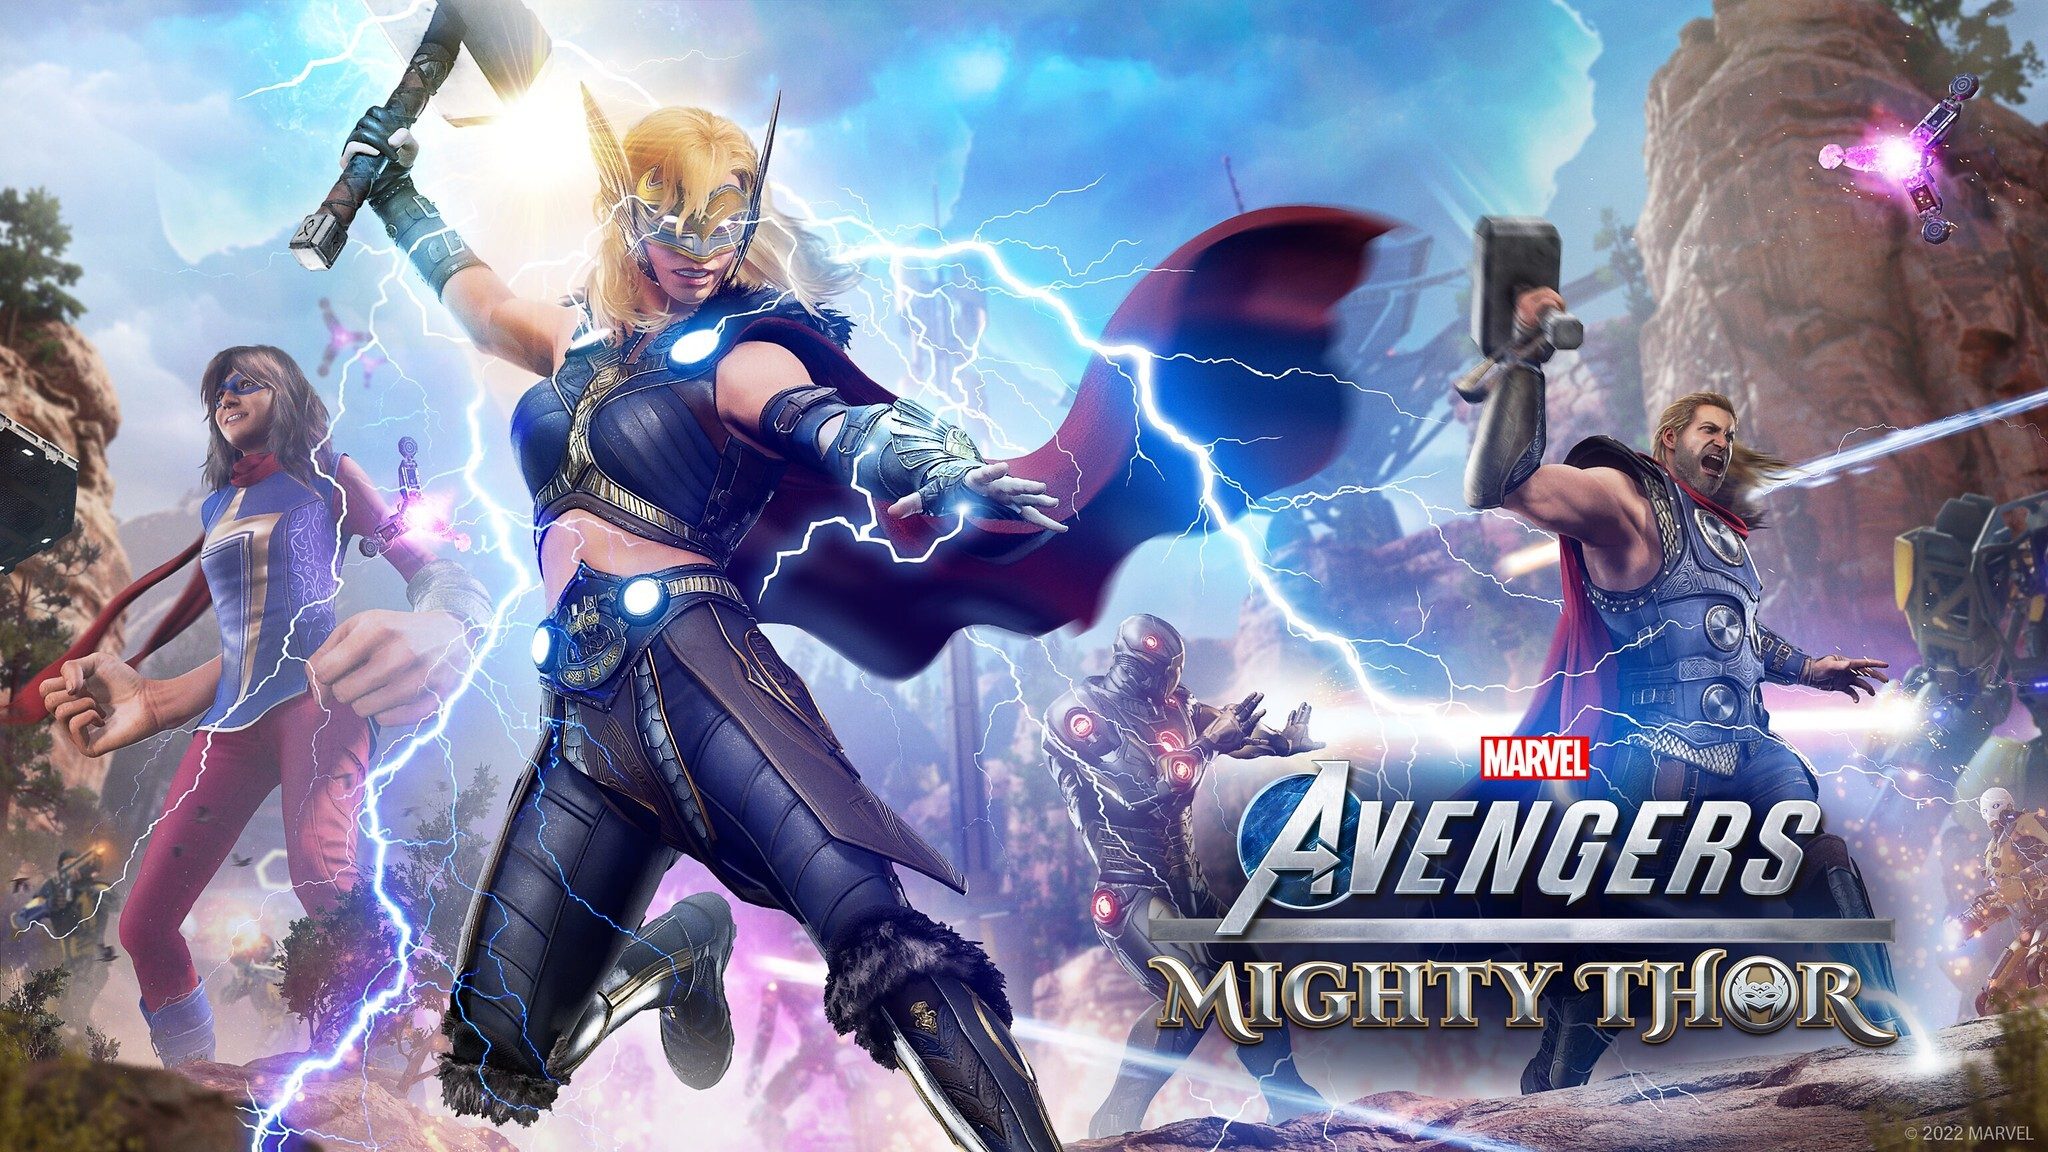 Marvel’s Avengers War Table deep dive introduces the Mighty Thor